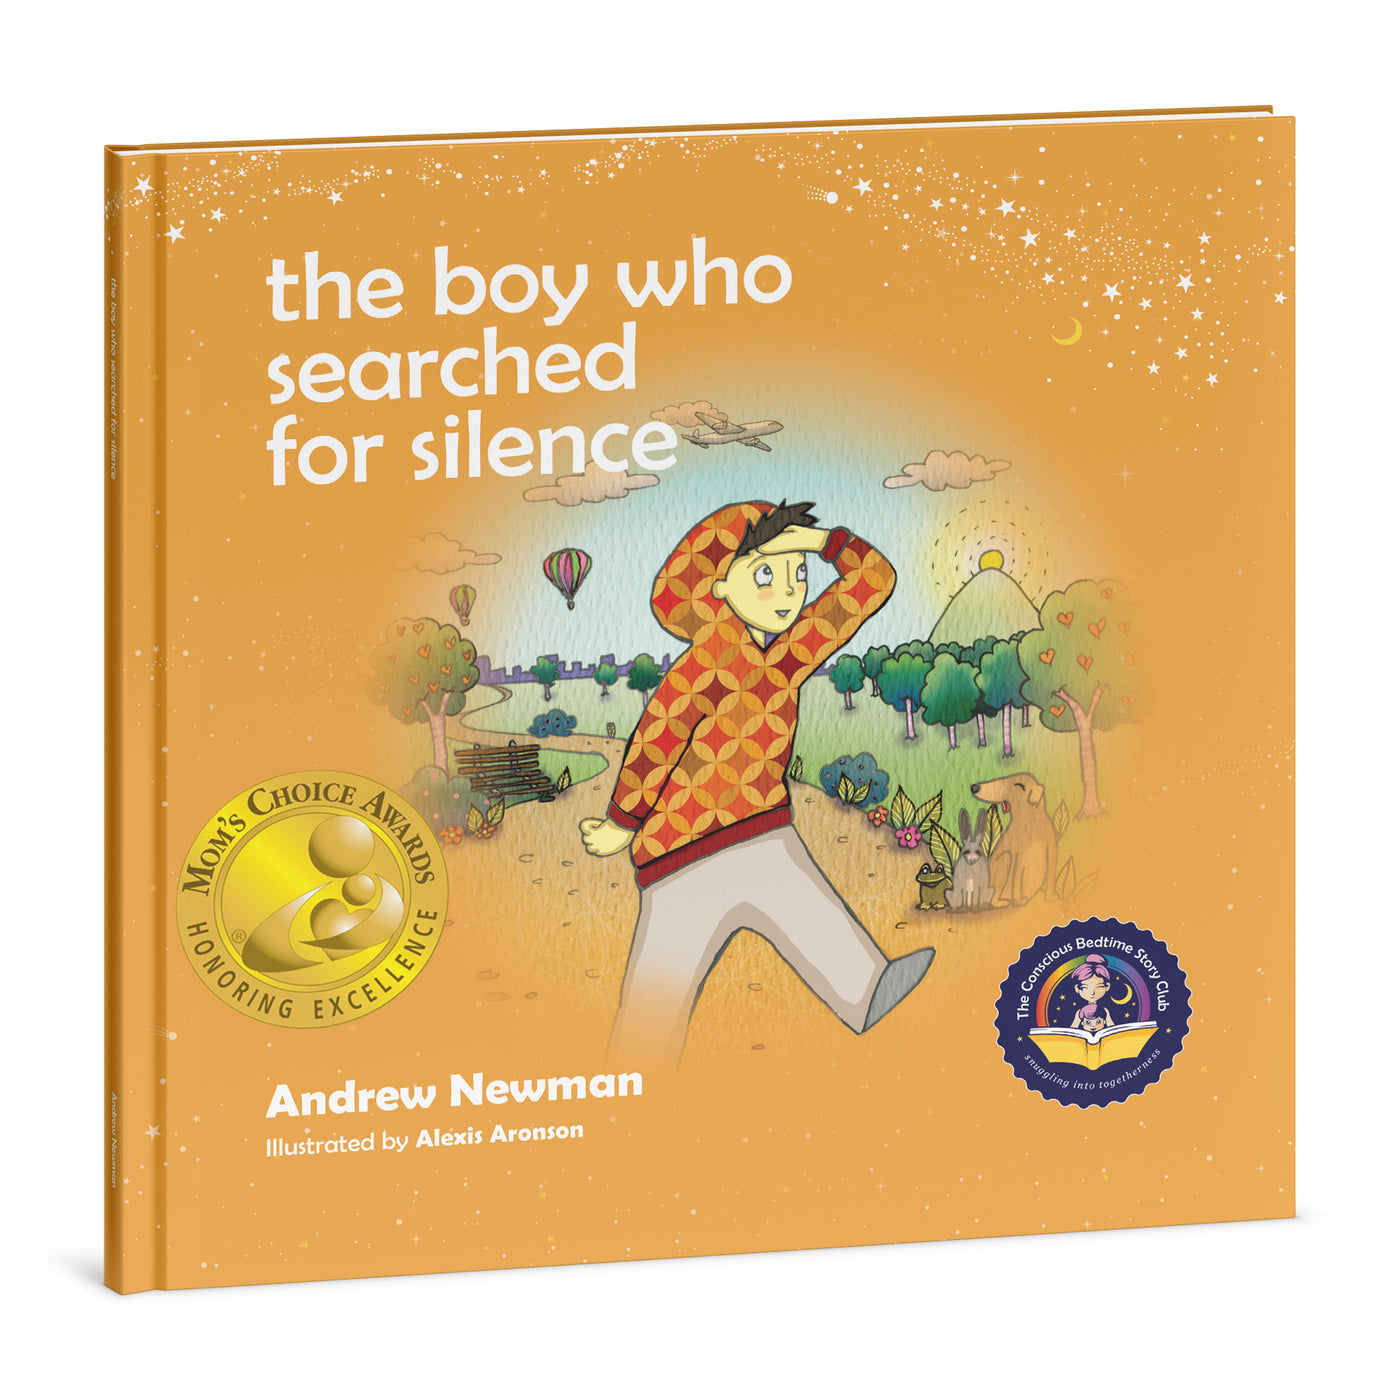 The Boy Who Searched for Silence: Helping young children find silence within themselves